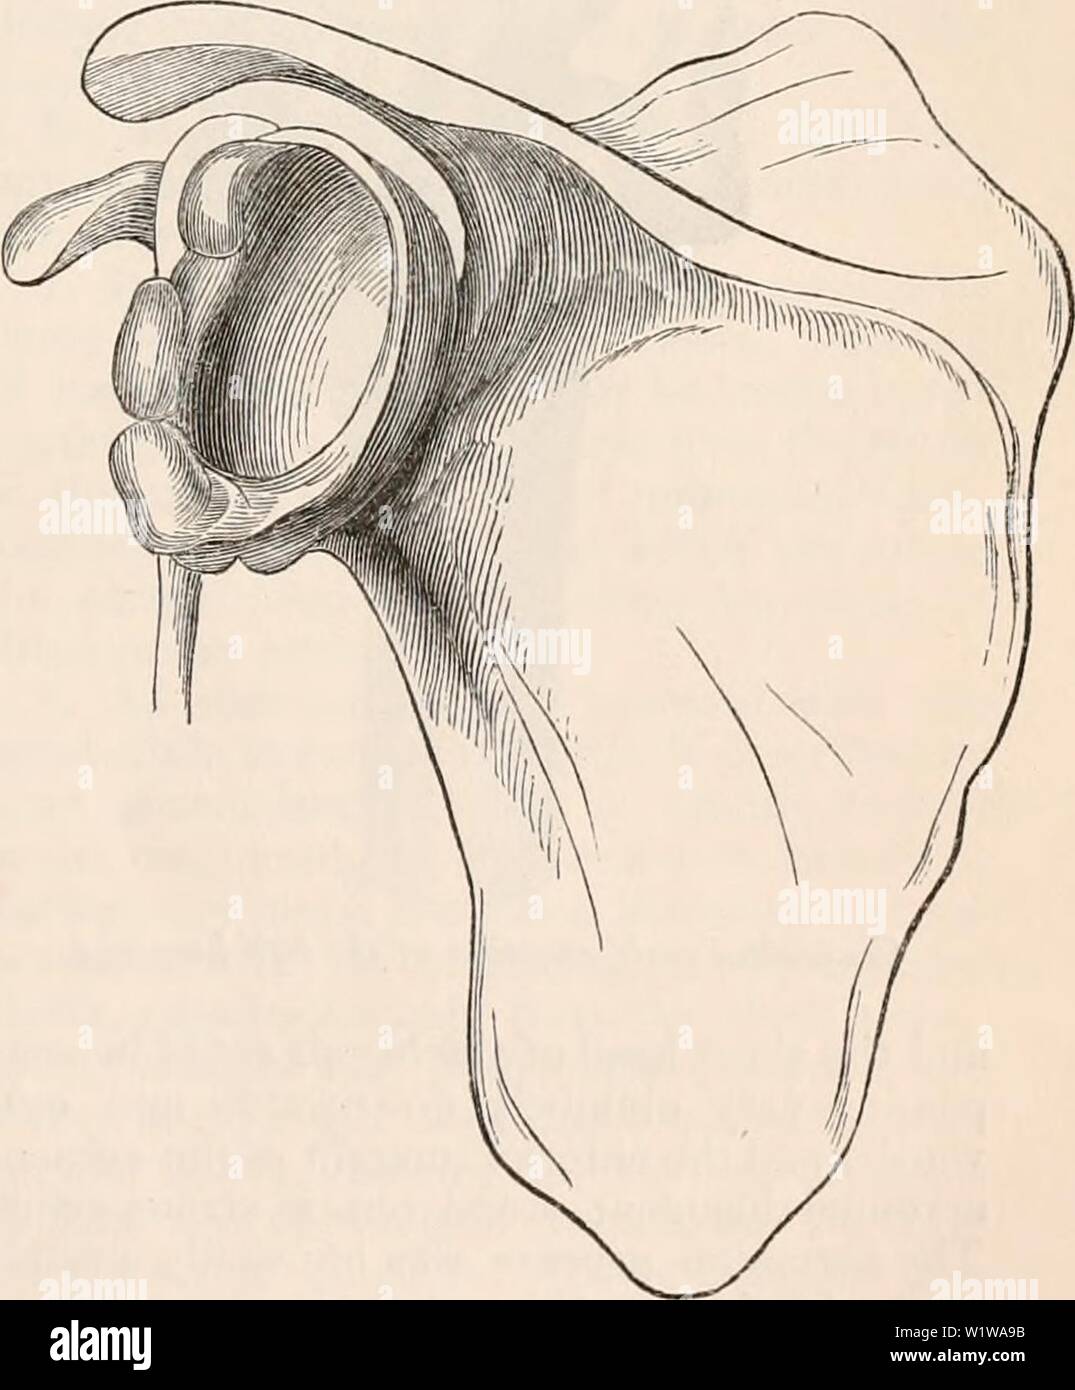 Archive image from page 640 of The cyclopædia of anatomy and. The cyclopædia of anatomy and physiology  cyclopdiaofana0401todd Year: 1847 ABNORMAL CONDITIONS OF THE SHOULDER JOINT. 619 flammation of the membranes of the brain, and Dr. Smith made the post-mortem ex- amination. Upon entering the room his attention was attracted by the appearances which the shoulder joints presented. The de- viations from the normal state were most remarkable at the left side. The muscles of the shoulder and arm were atrophied, the acromion process projected considerably, and the head of the humerus could be perc Stock Photo